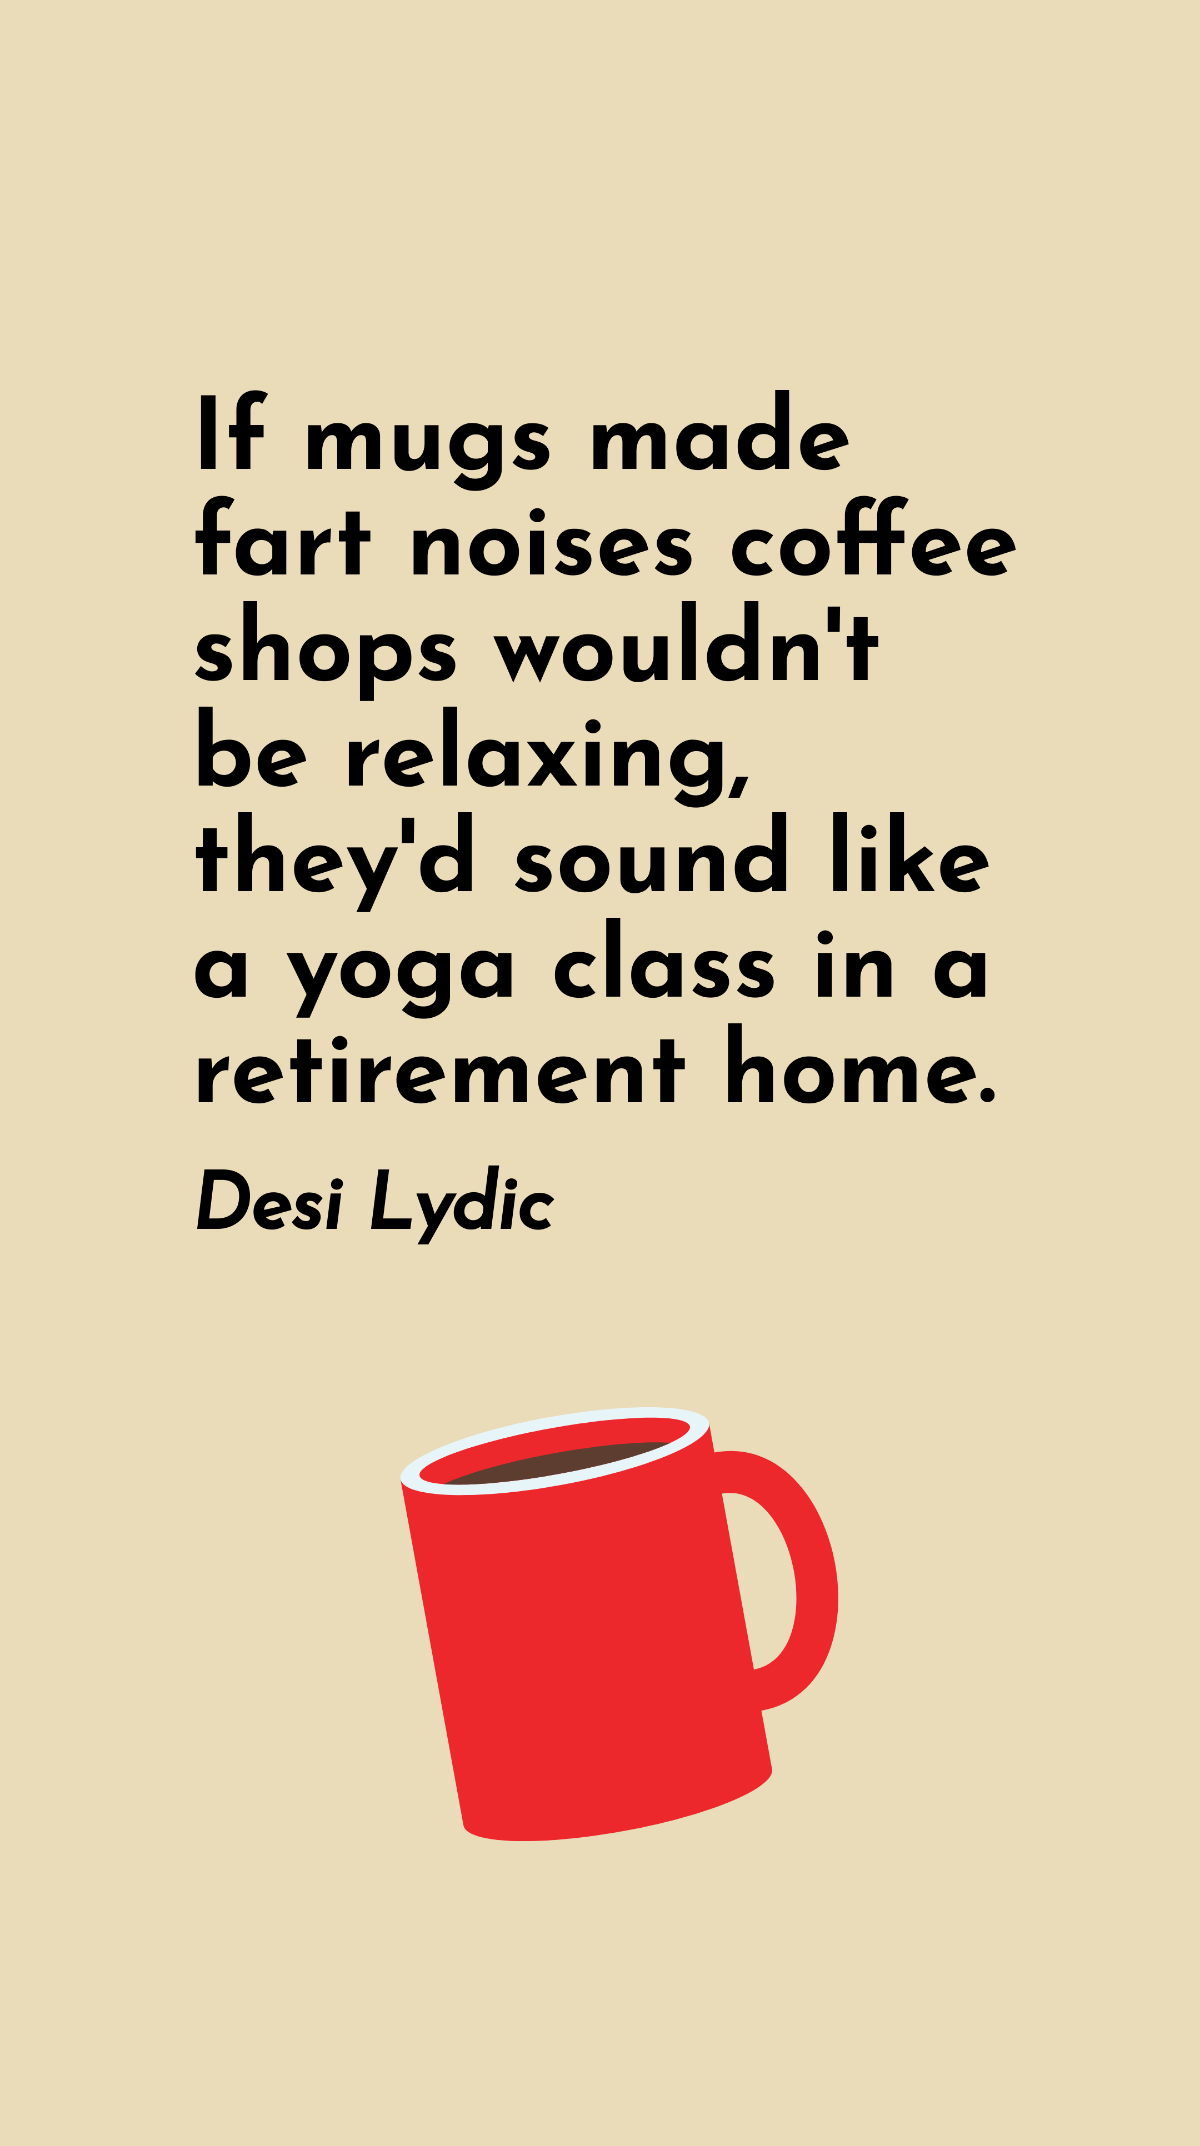 Free Desi Lydic - If mugs made fart noises coffee shops wouldn't be relaxing, they'd sound like a yoga class in a retirement home. Template